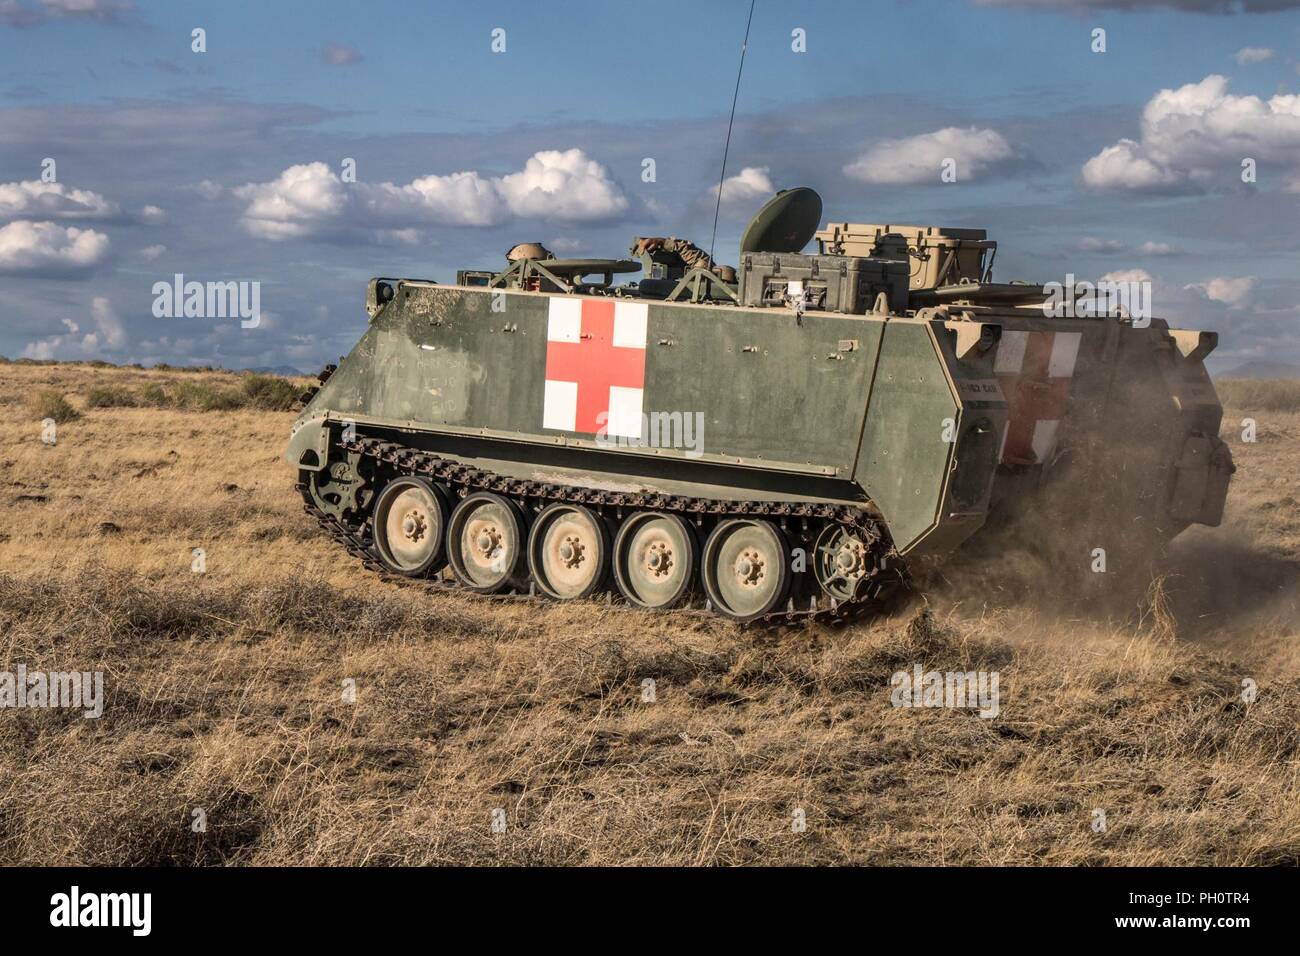 A medic M113 armored personnel carrier moves toward an objective during a simulated exercise at Orchard Training Center, Idaho, on June 19, 2018. The exercise allowed medics to perform simulated training of casualties within an armored vehicle. Stock Photo